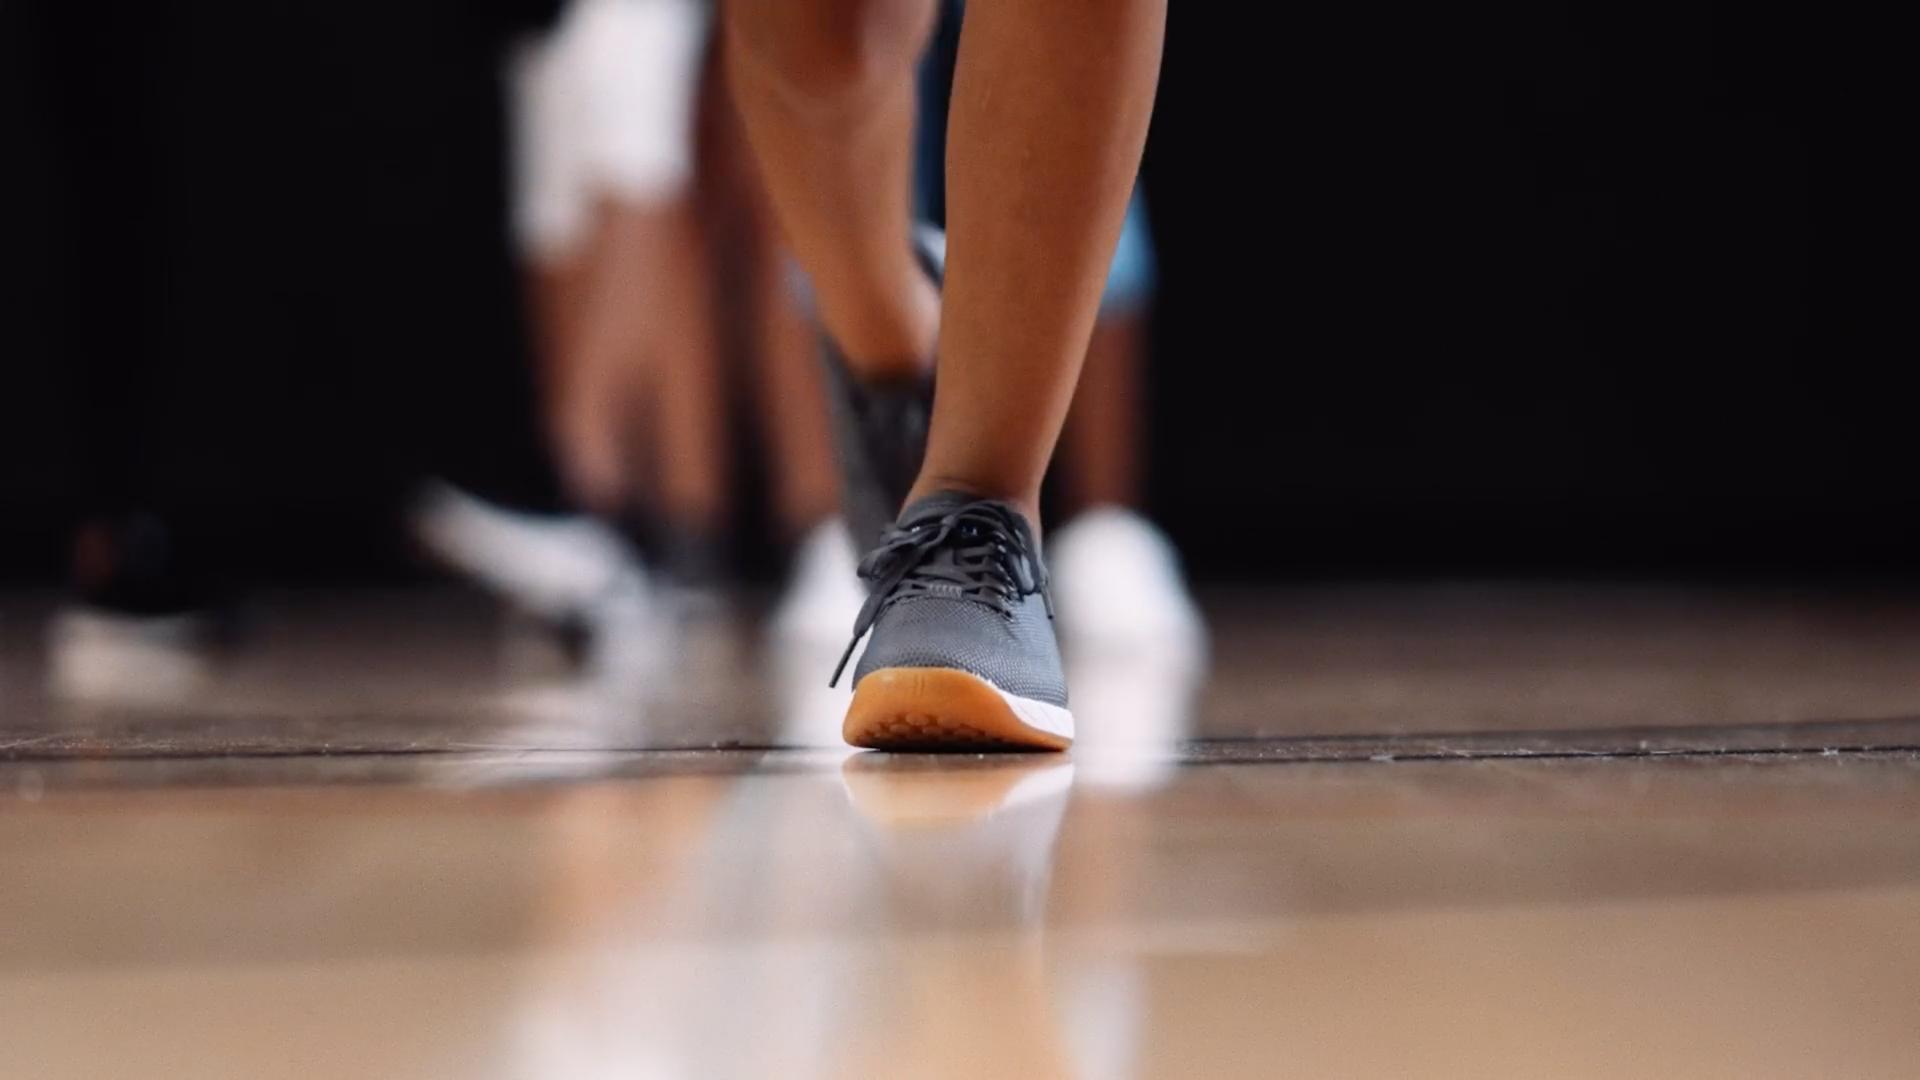 focus on a young athletes feet and shoes on a gym floor with other children's feet in the background